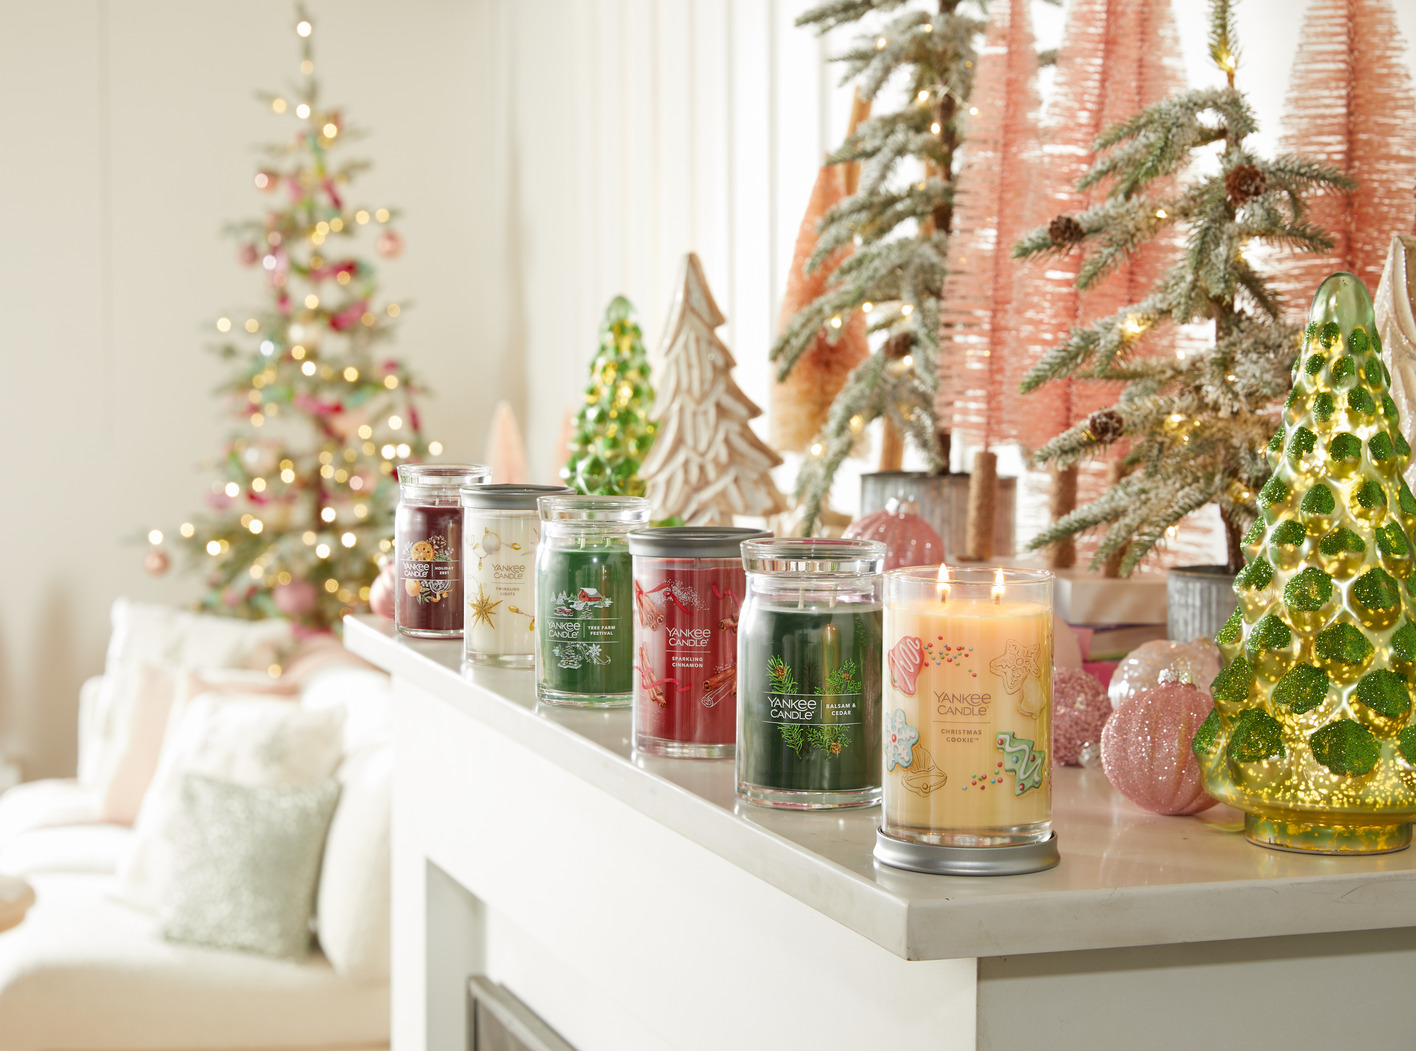 Buy One, Get One 50% off All Large Candles from Yankee Candle